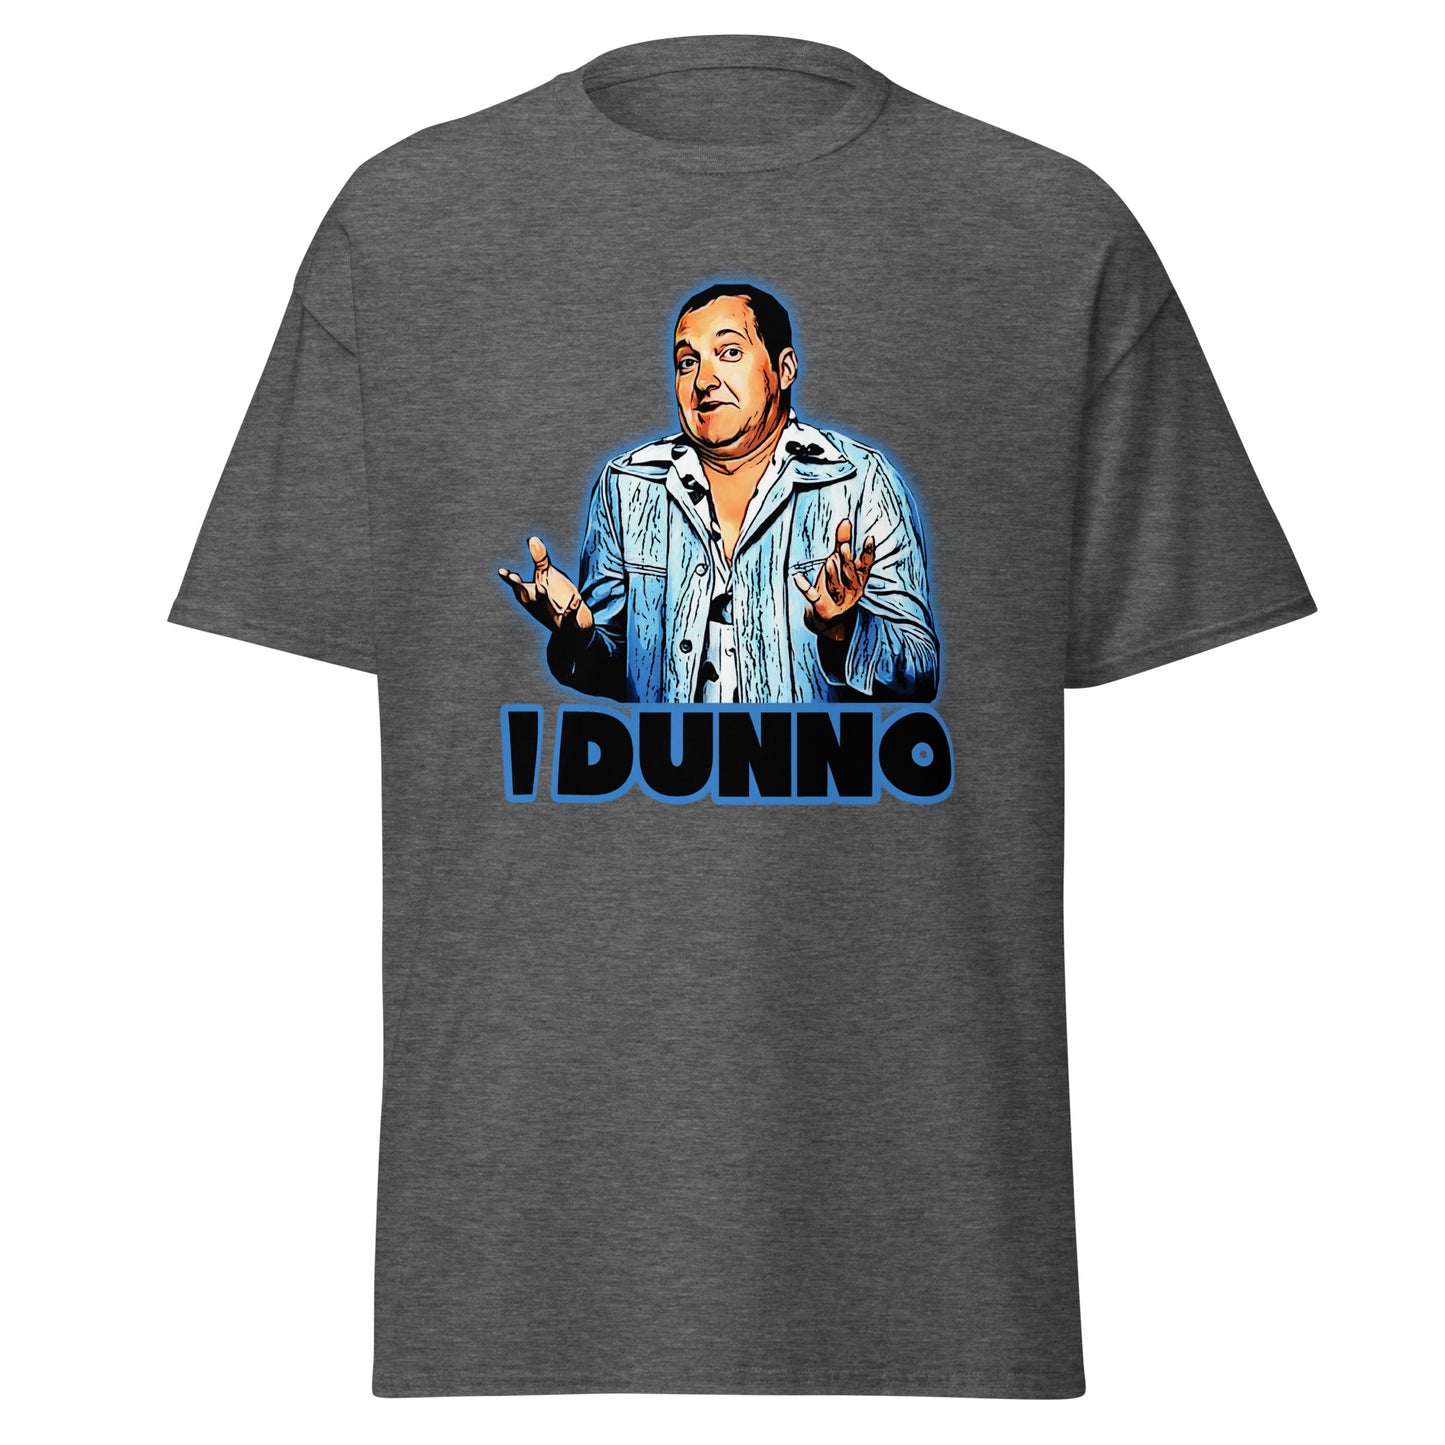 Cousin Eddie - 'I Dunno' T-Shirt - A Classic Quote